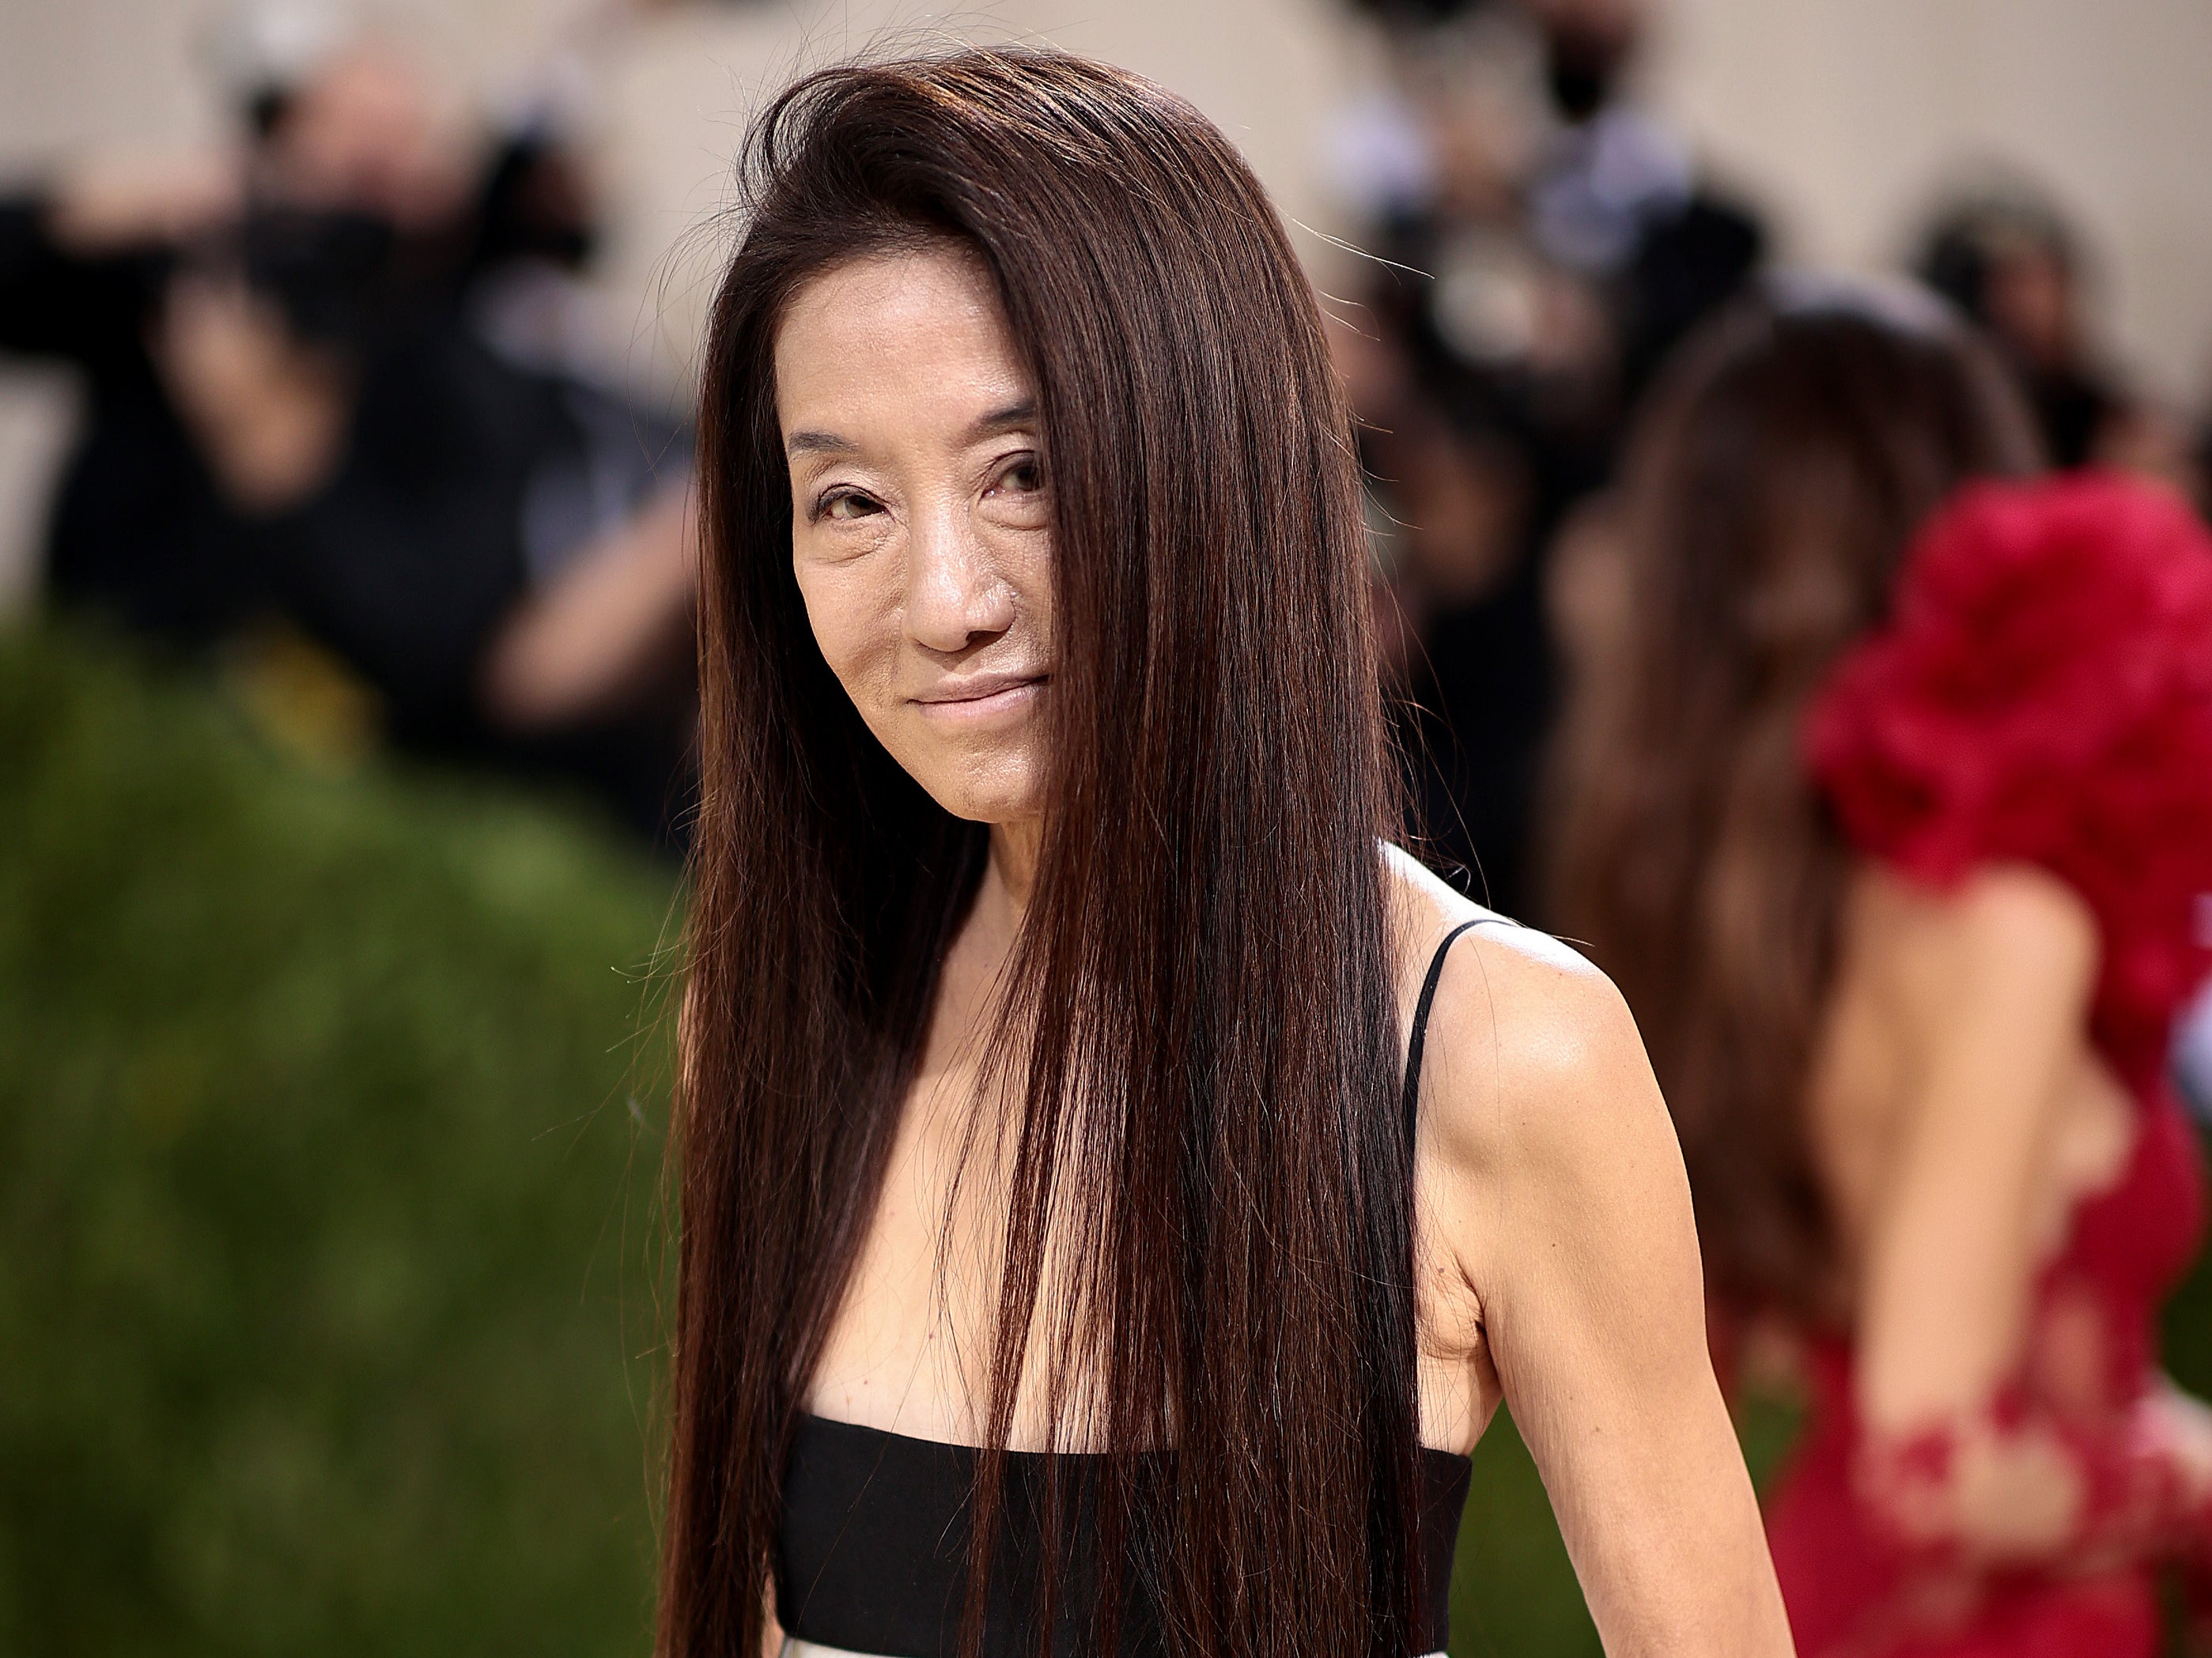 Vera Wang attends The 2021 Met Gala Celebrating In America: A Lexicon Of Fashion at Metropolitan Museum of Art on September 13, 2021 in New York City